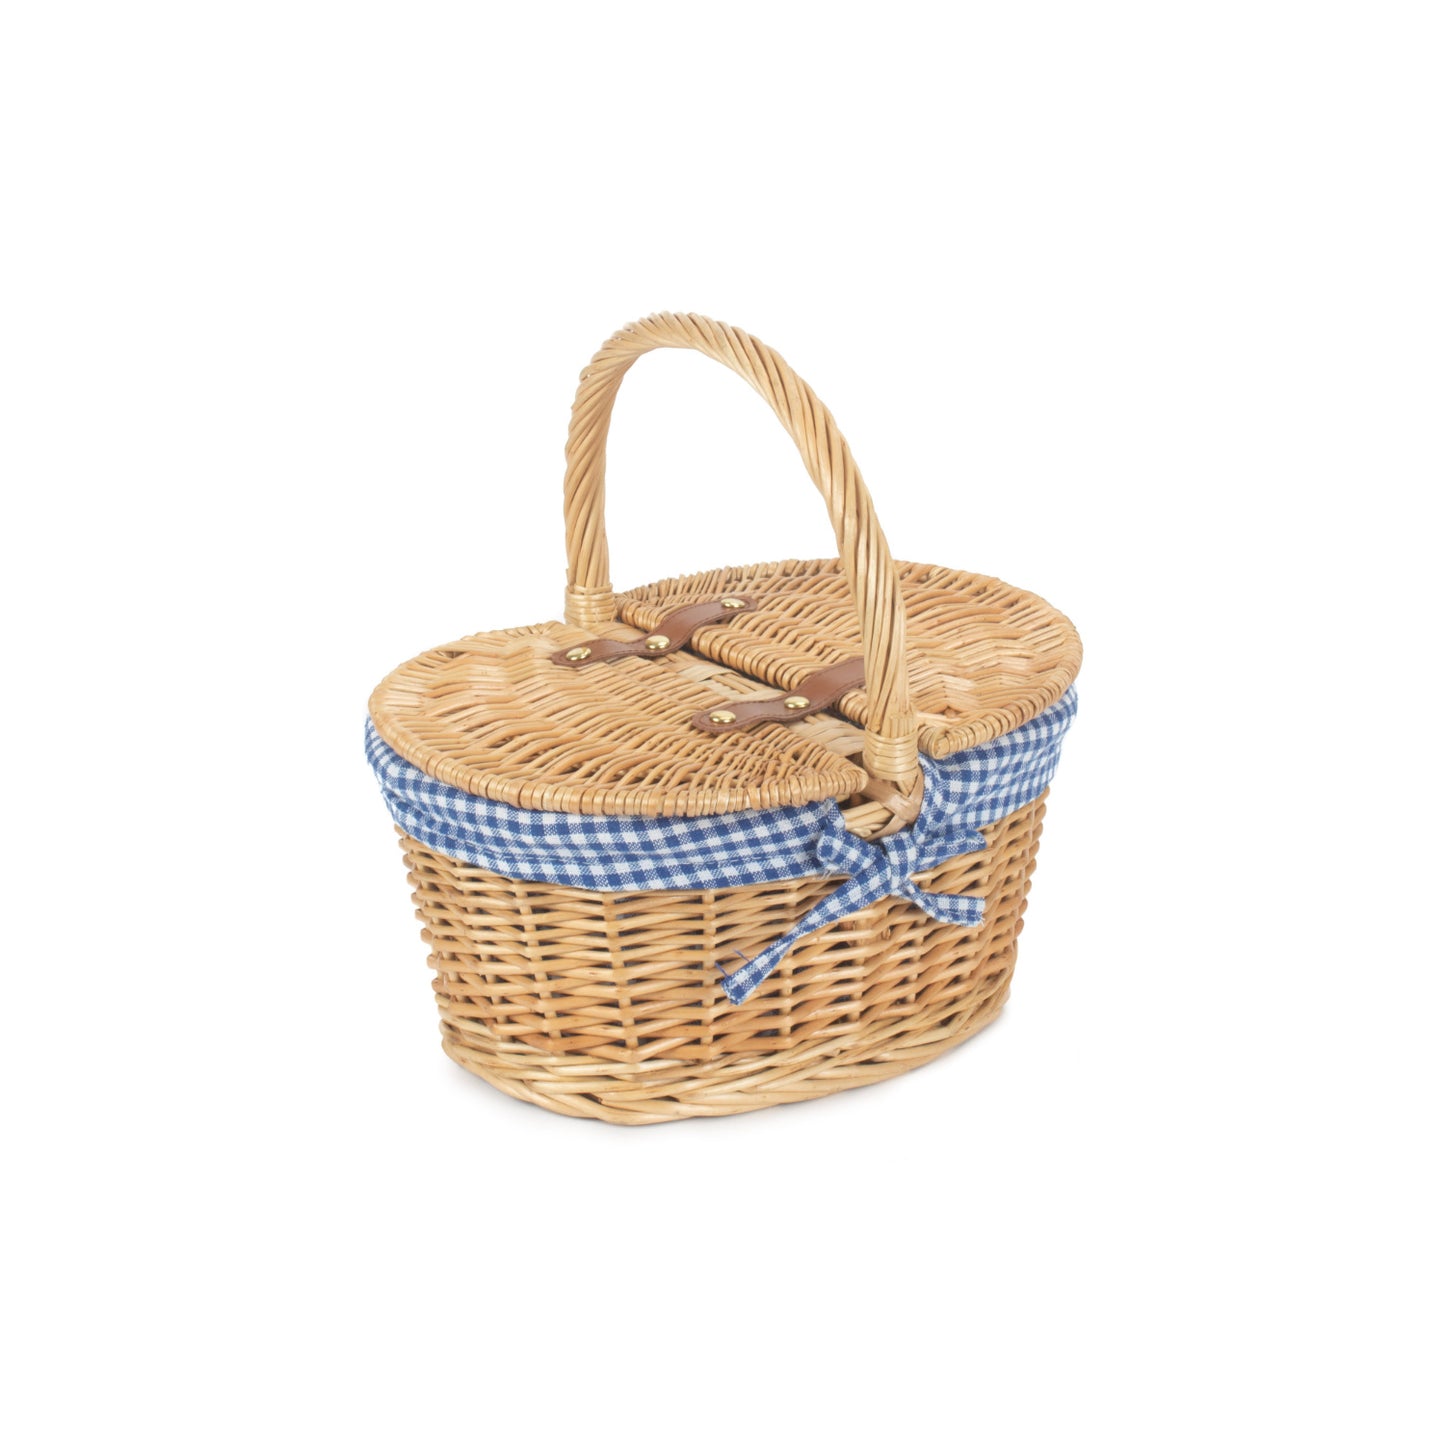 Child's Oval Lined Lidded Hamper With Blue & White Checked Lining